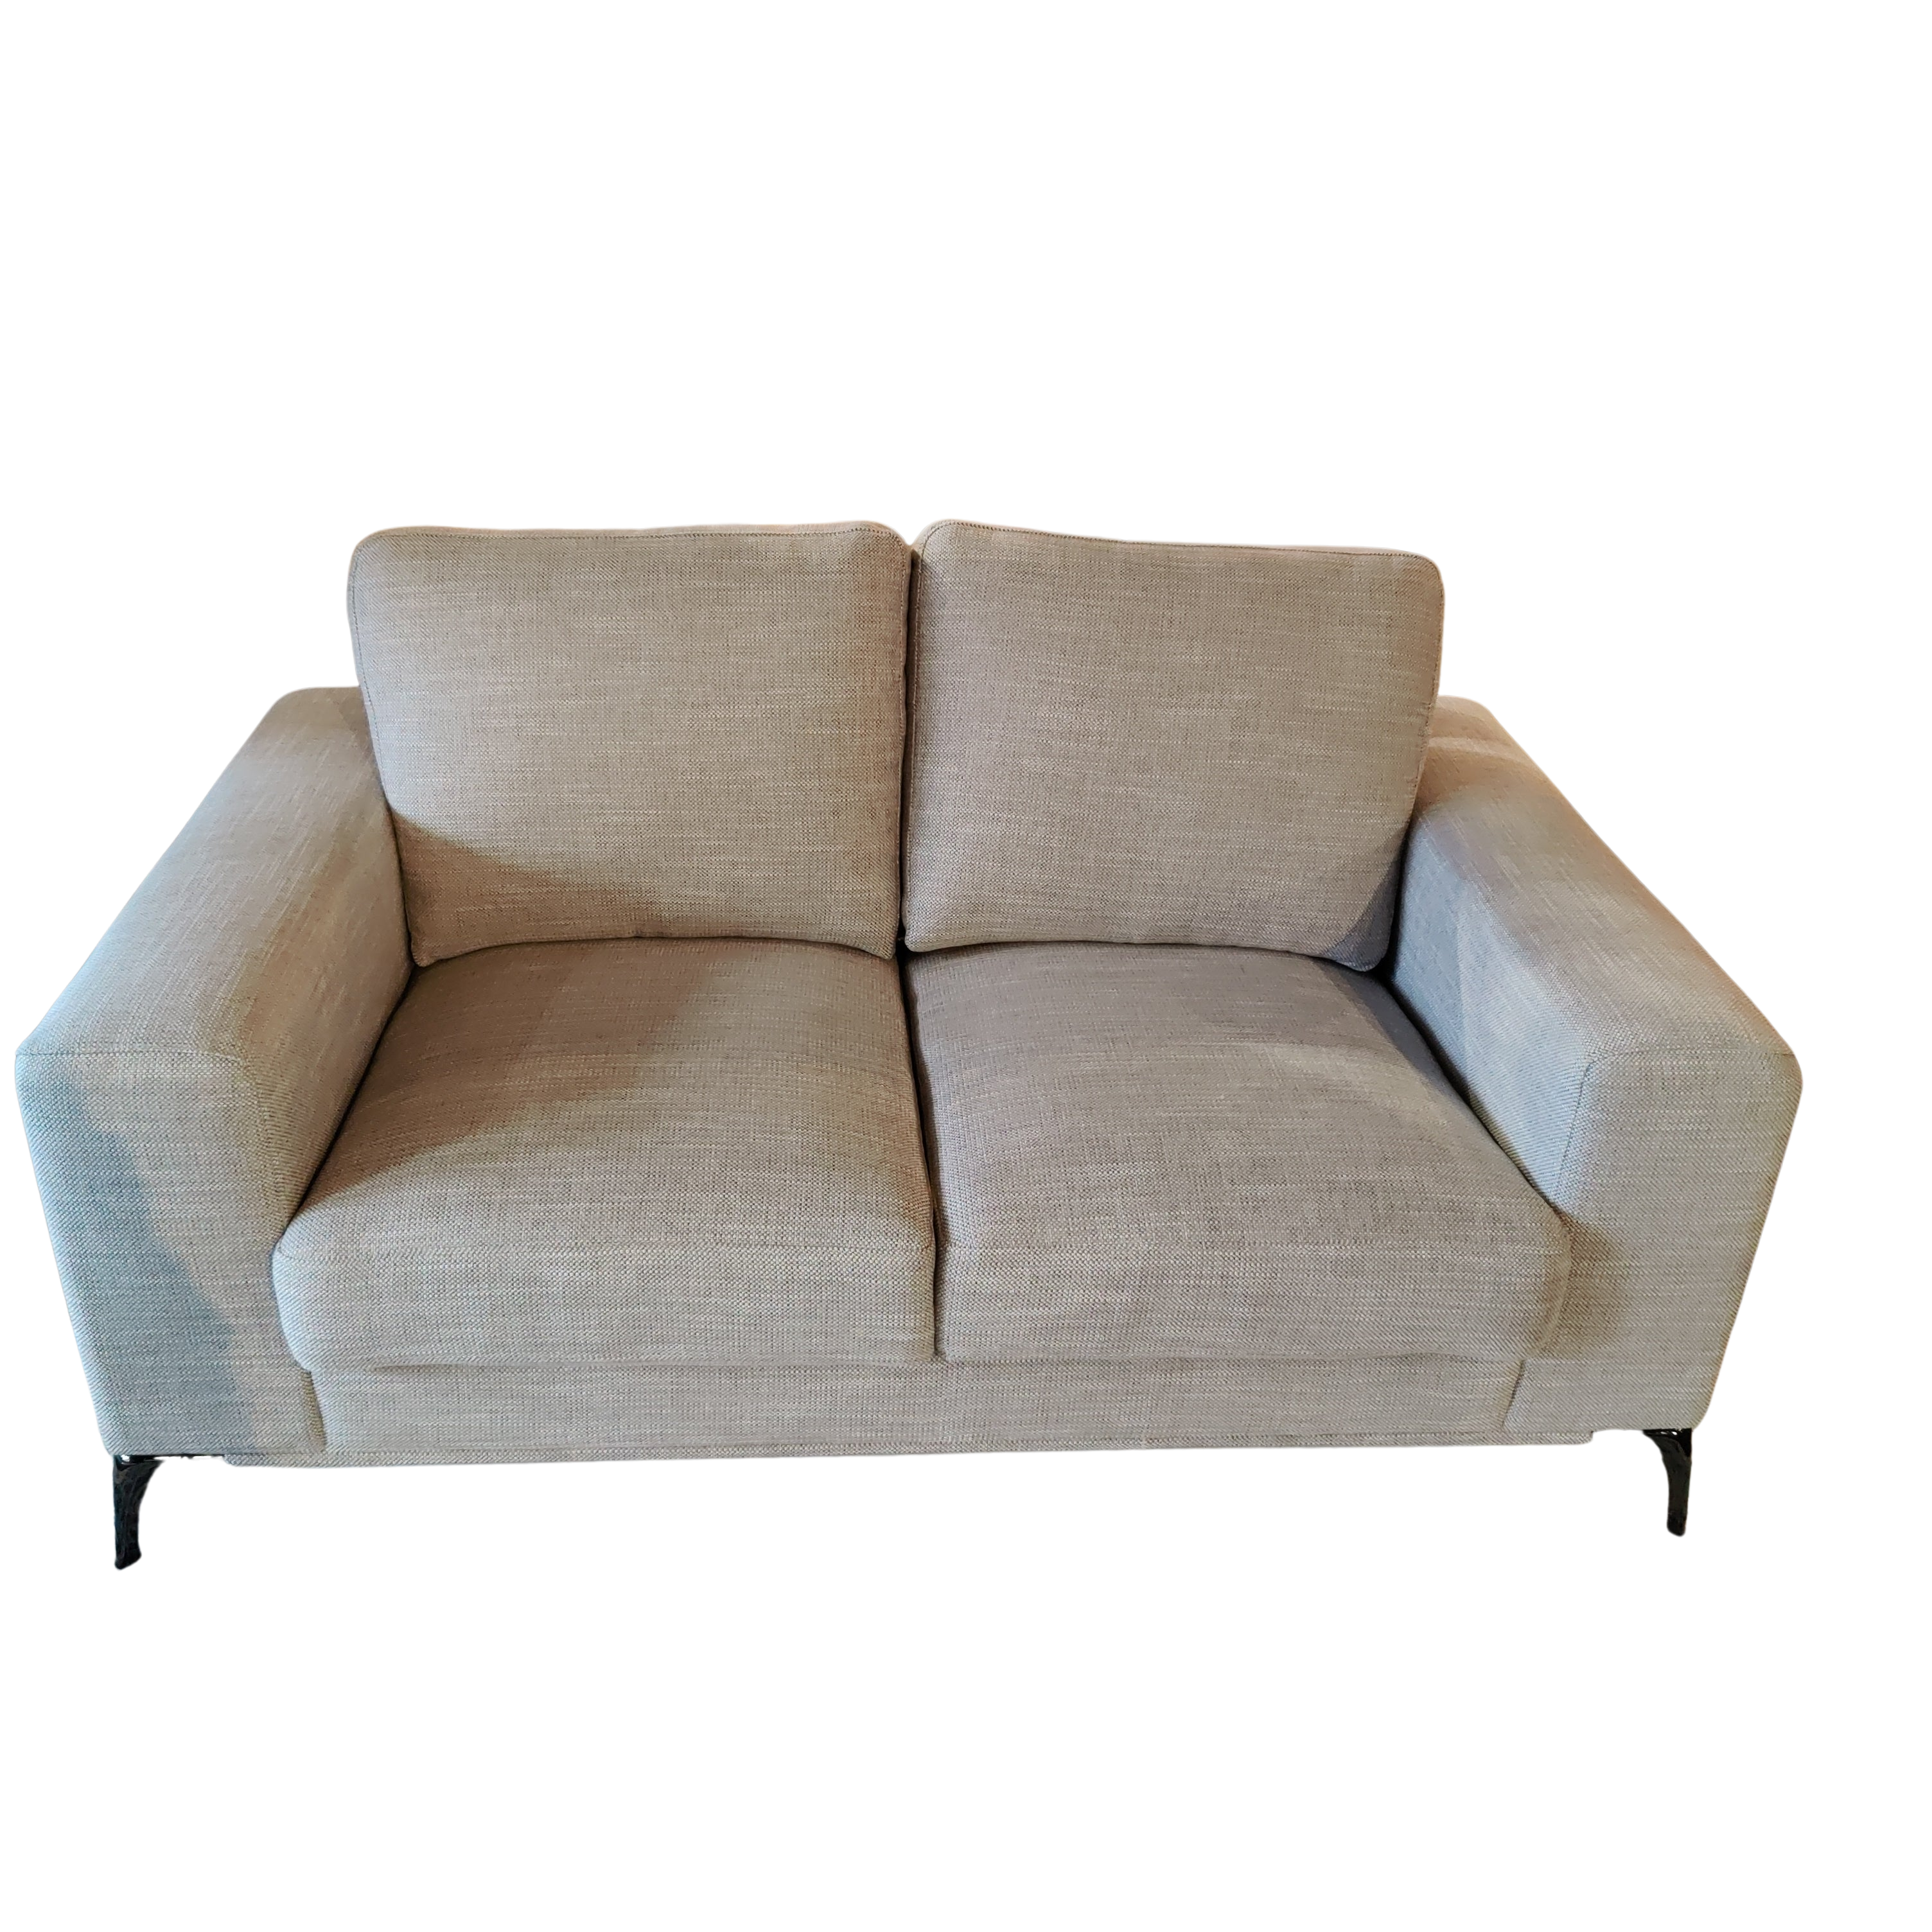 comfortable and well build modern loveseat, sleek and minimalistic design. 